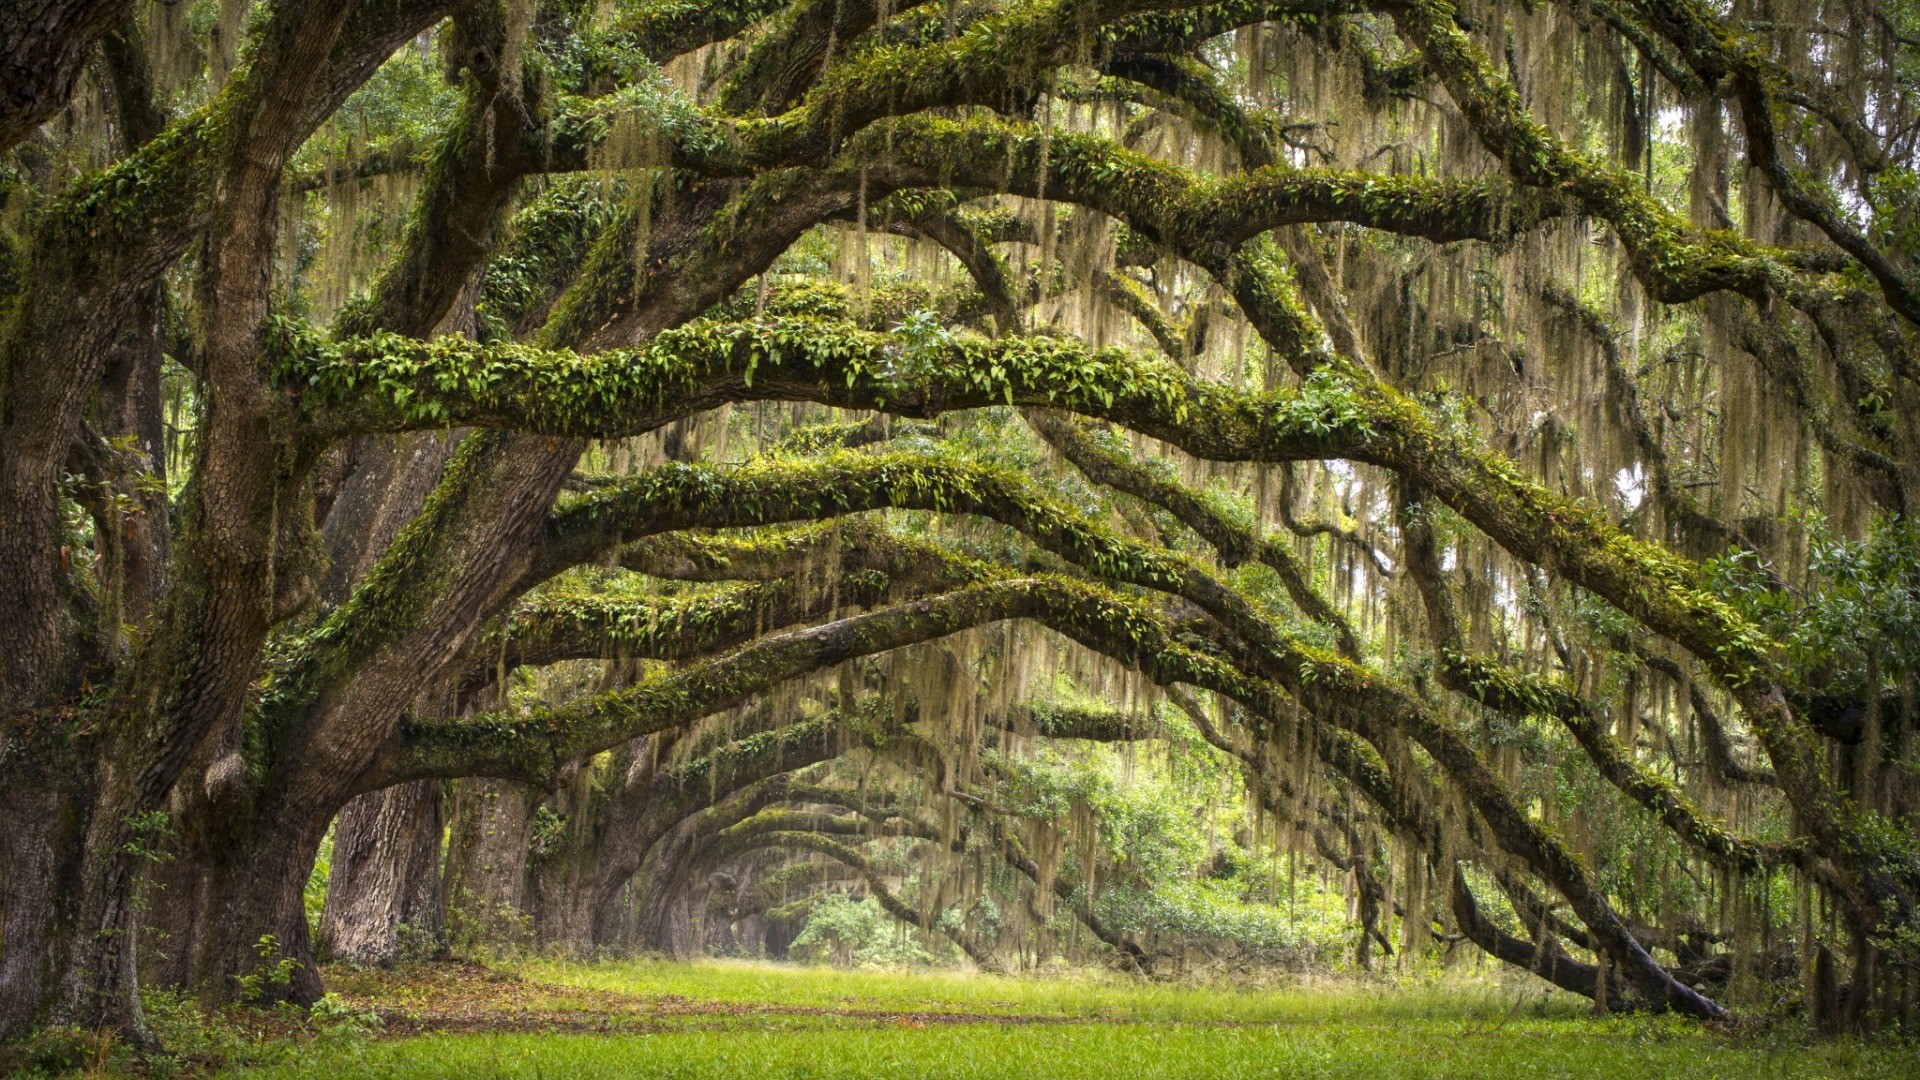 General 1920x1080 nature landscape trees branch leaves South Carolina USA forest moss grass field